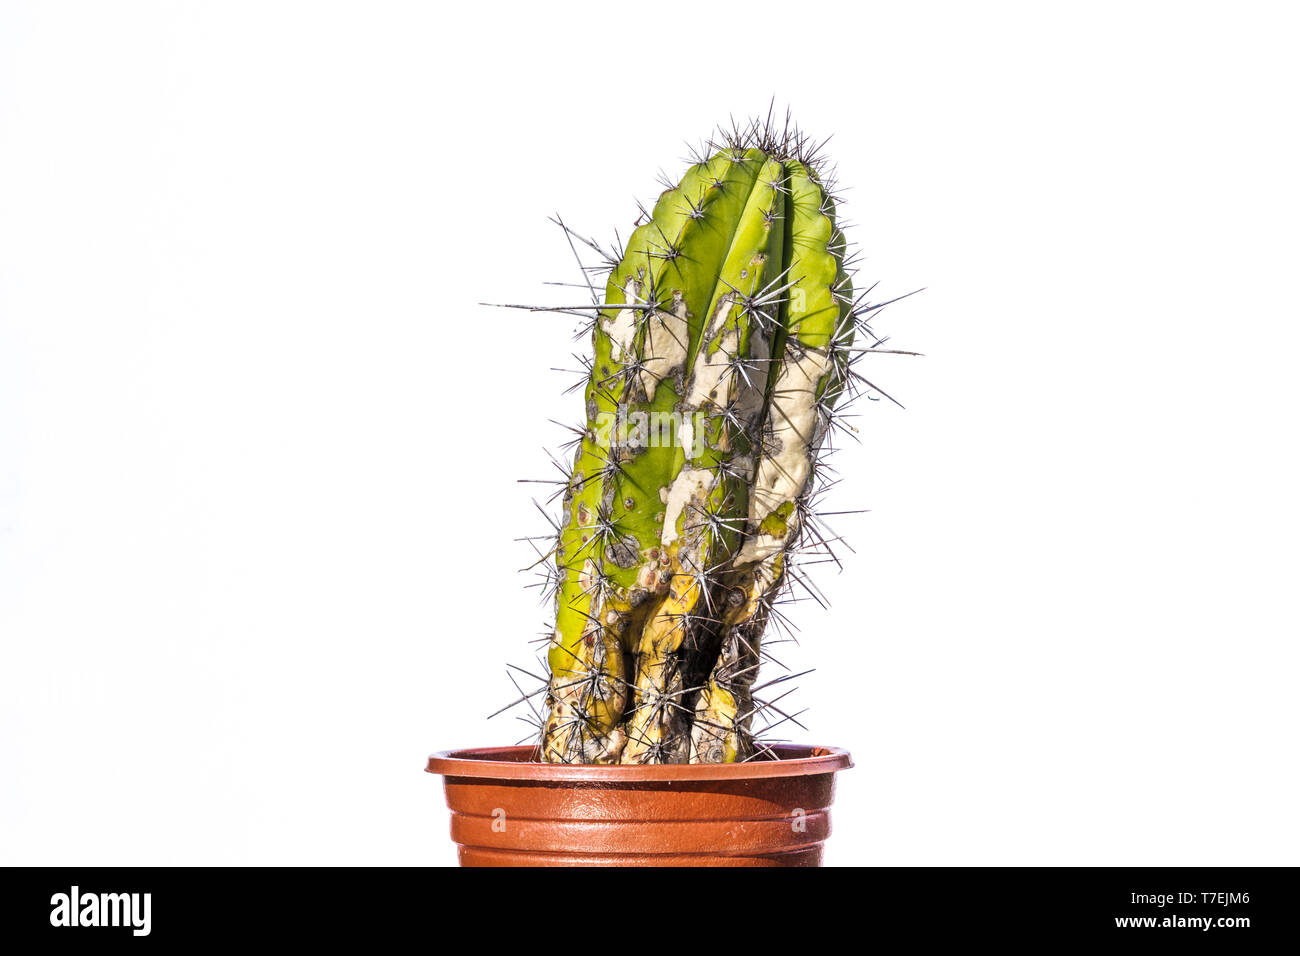 Neglected cactus, probably dying because of overwatering and cold. Stock Photo